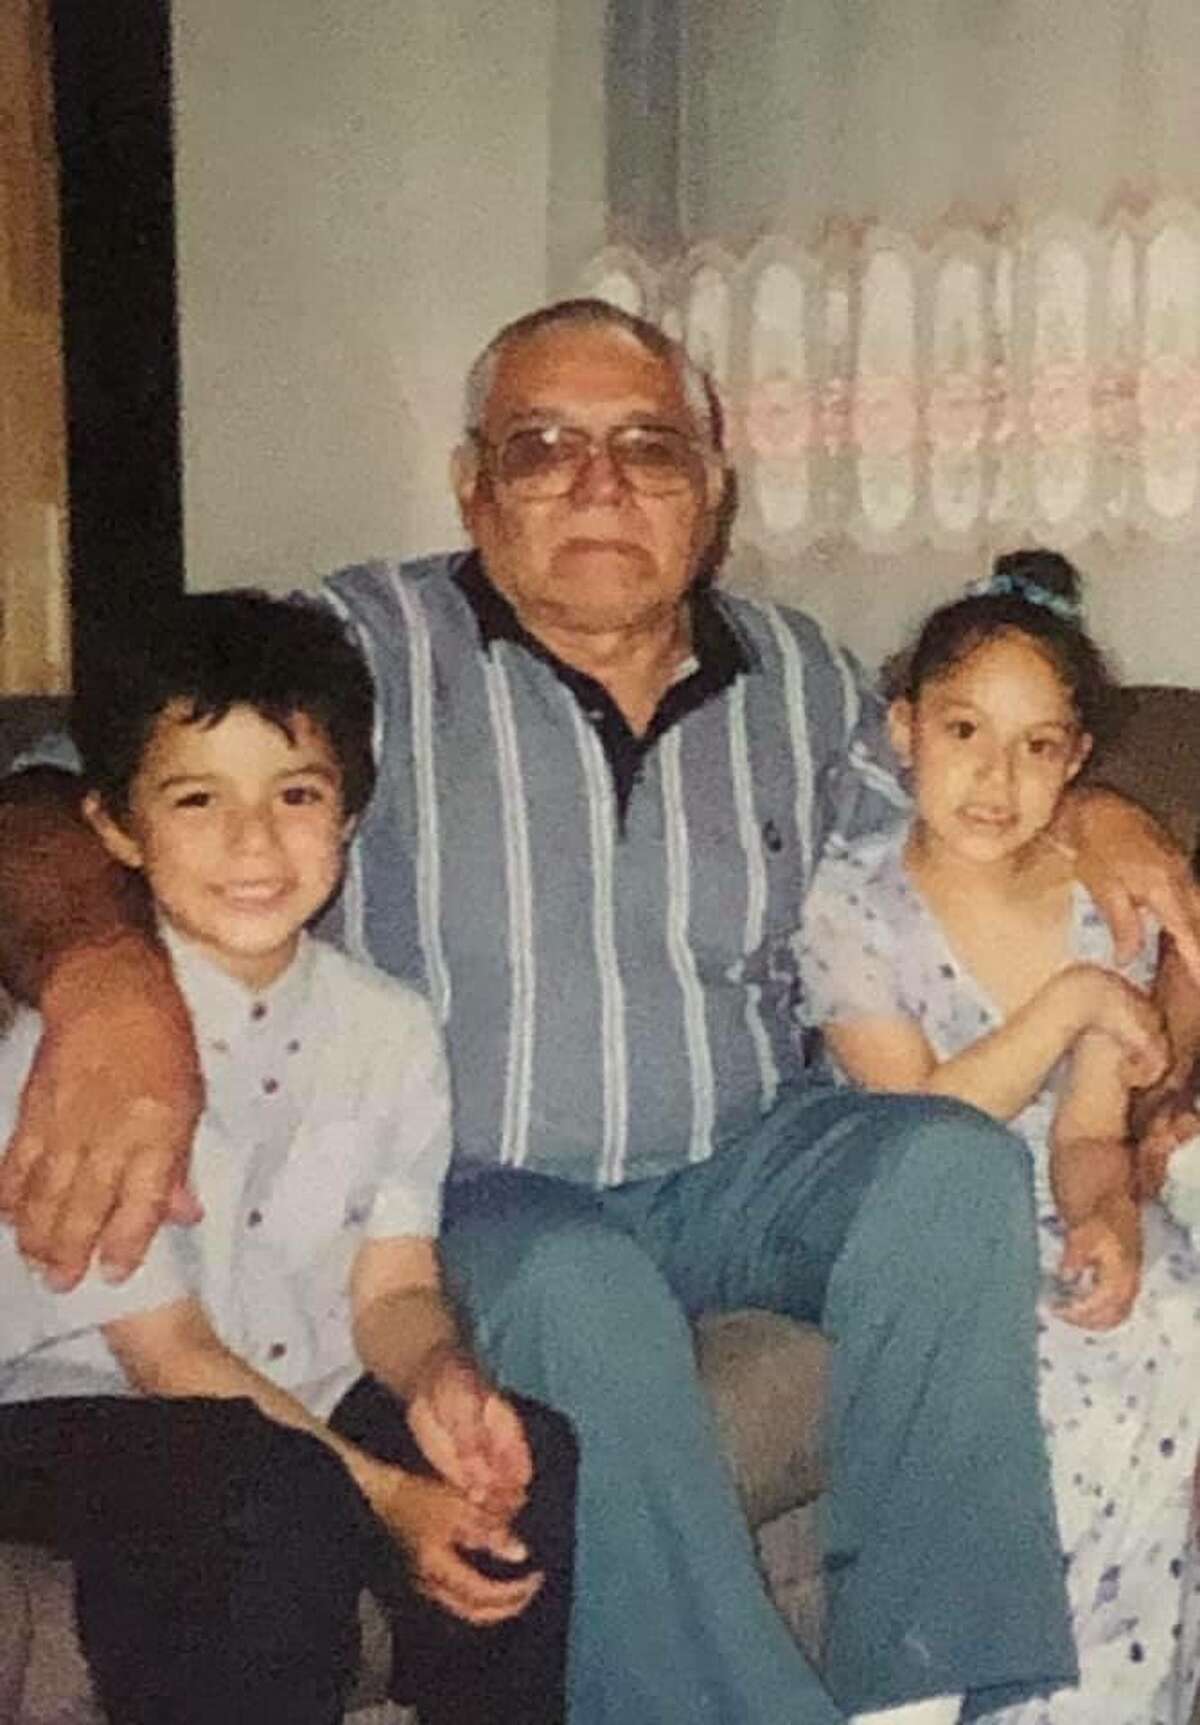 Juan Ayala with his grandfather Marcelino Guzman in the early 2000s.